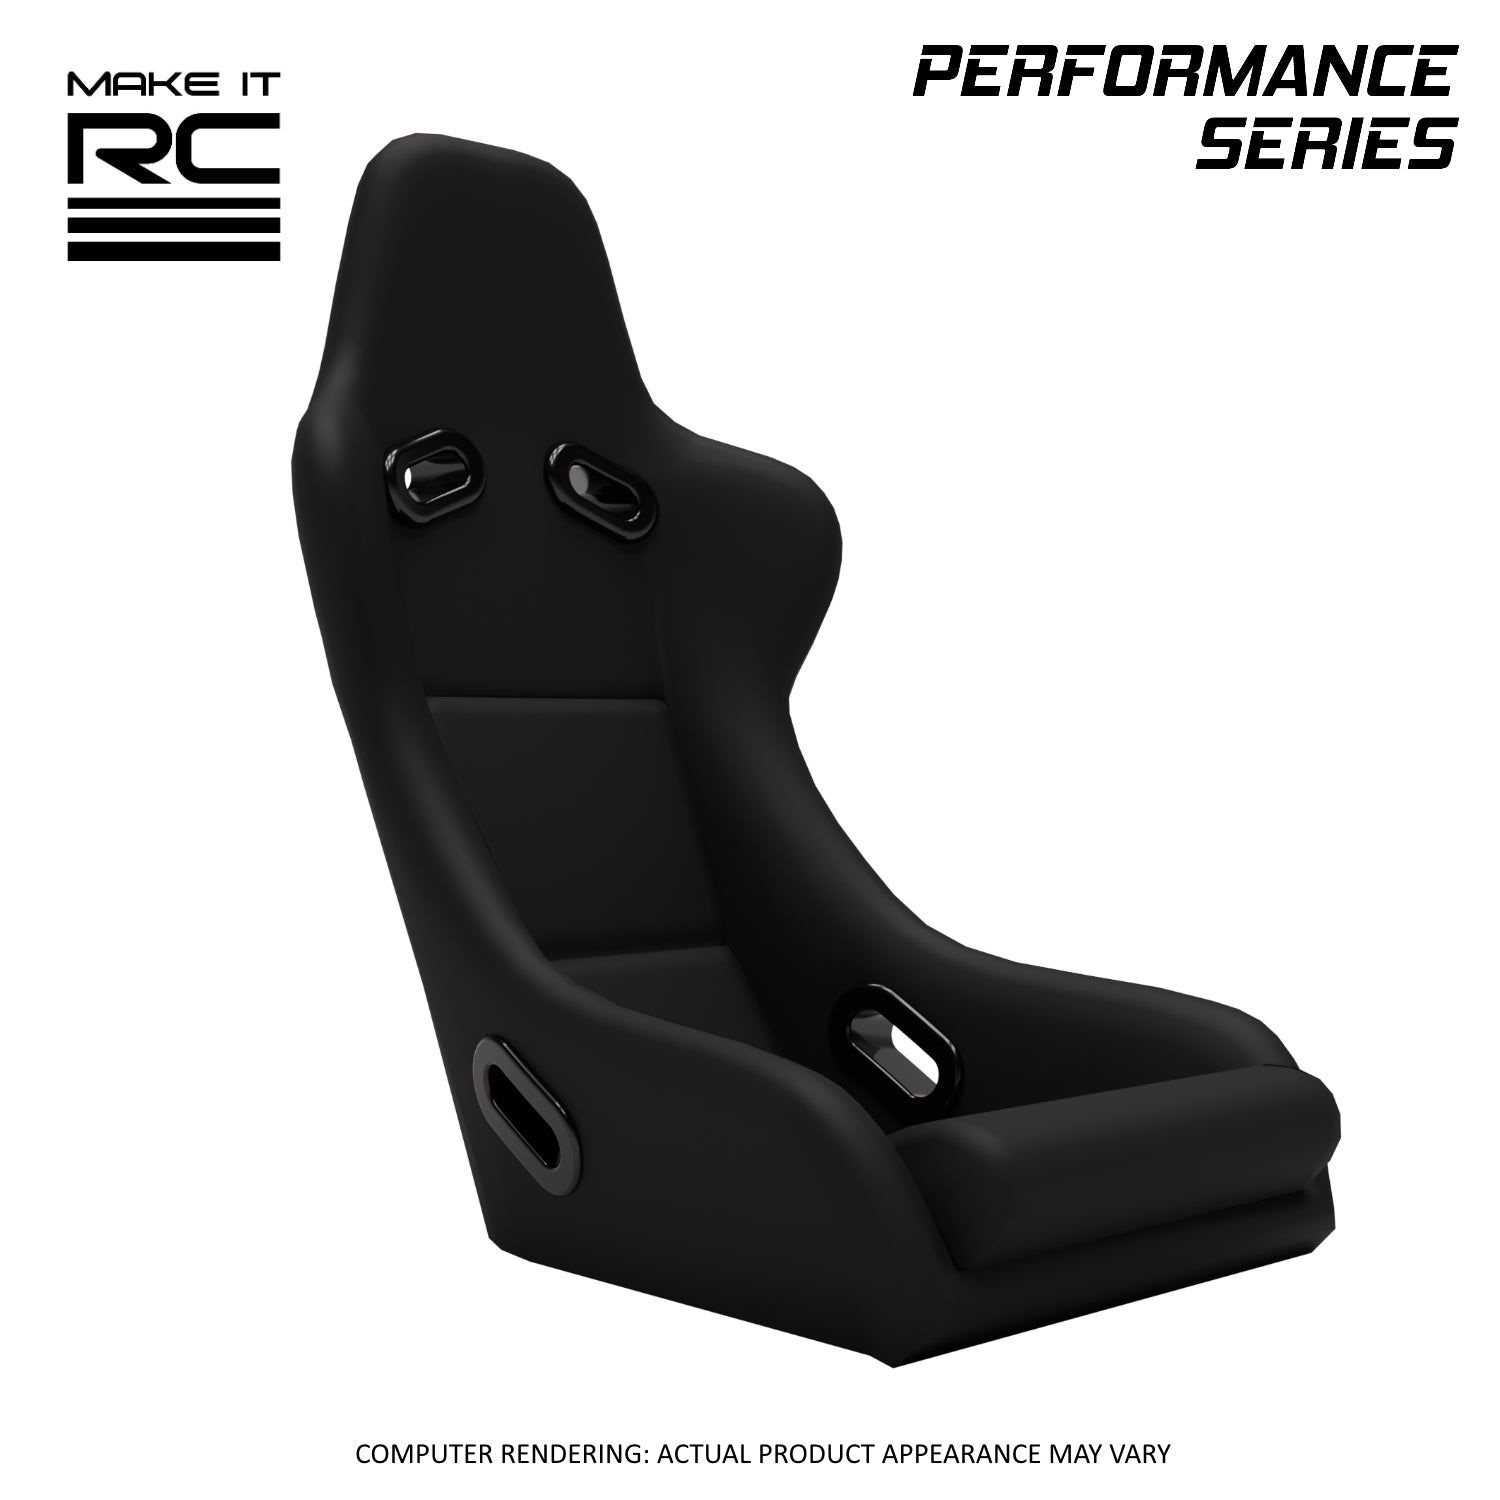 Make It RC GRS 300 Racing Seat for 1/10 Scale RC Car and Truck